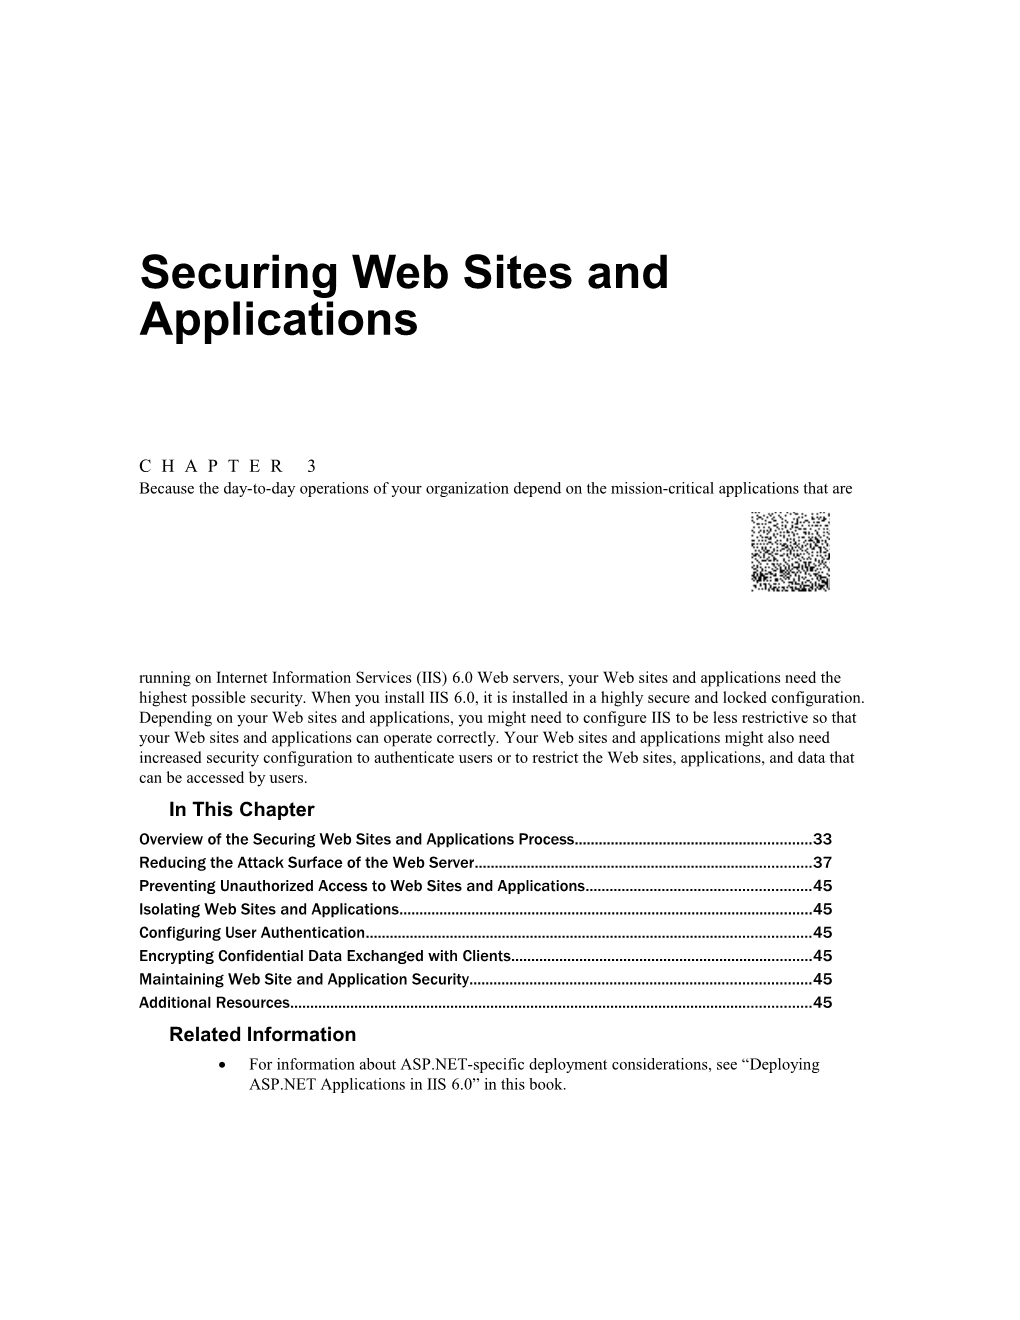 06 CHAPTER 3 Securing Web Sites and Applications